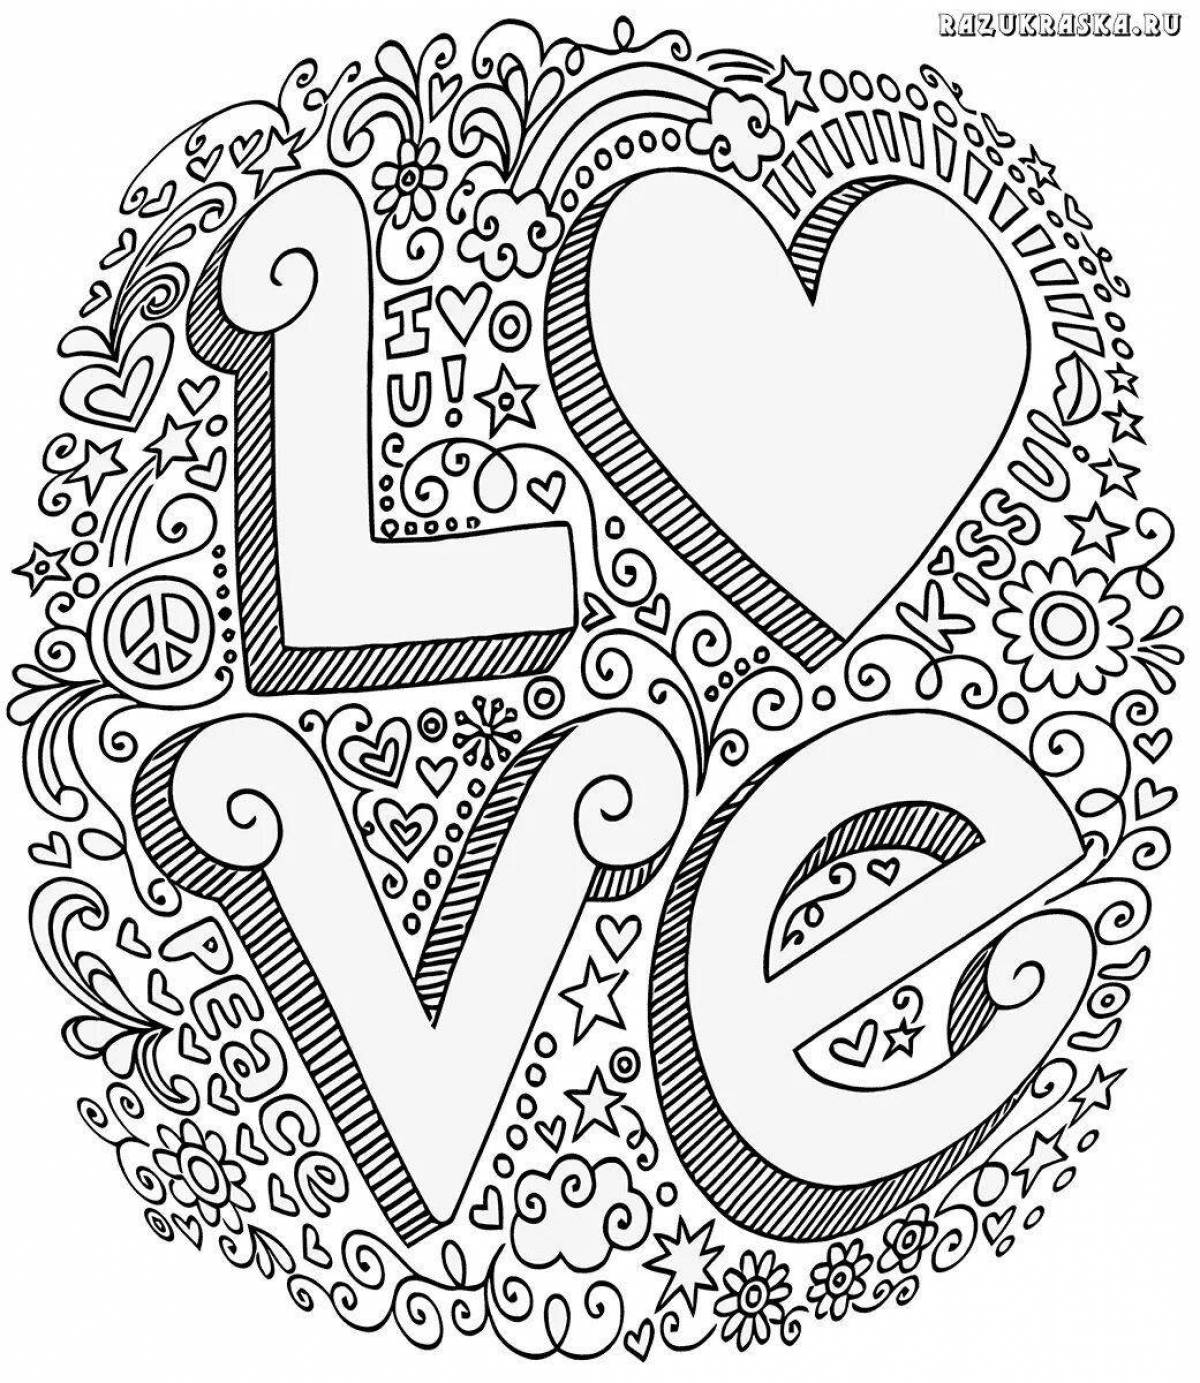 Playful 11th grade coloring page